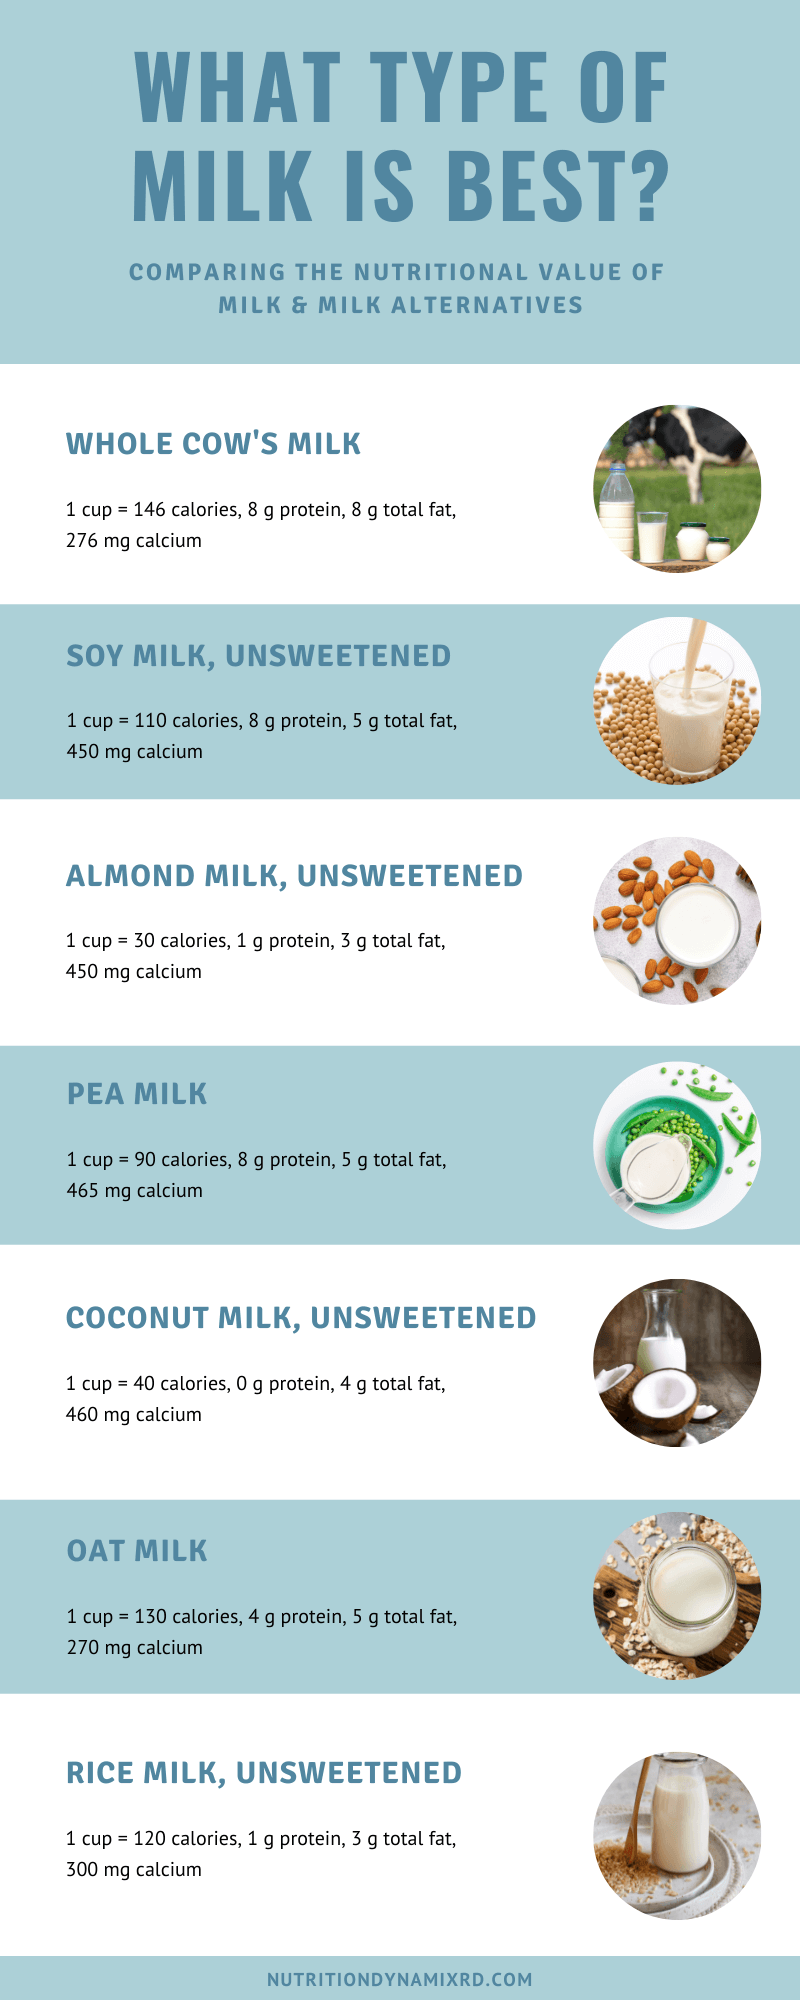 pictures and info on different types of milk